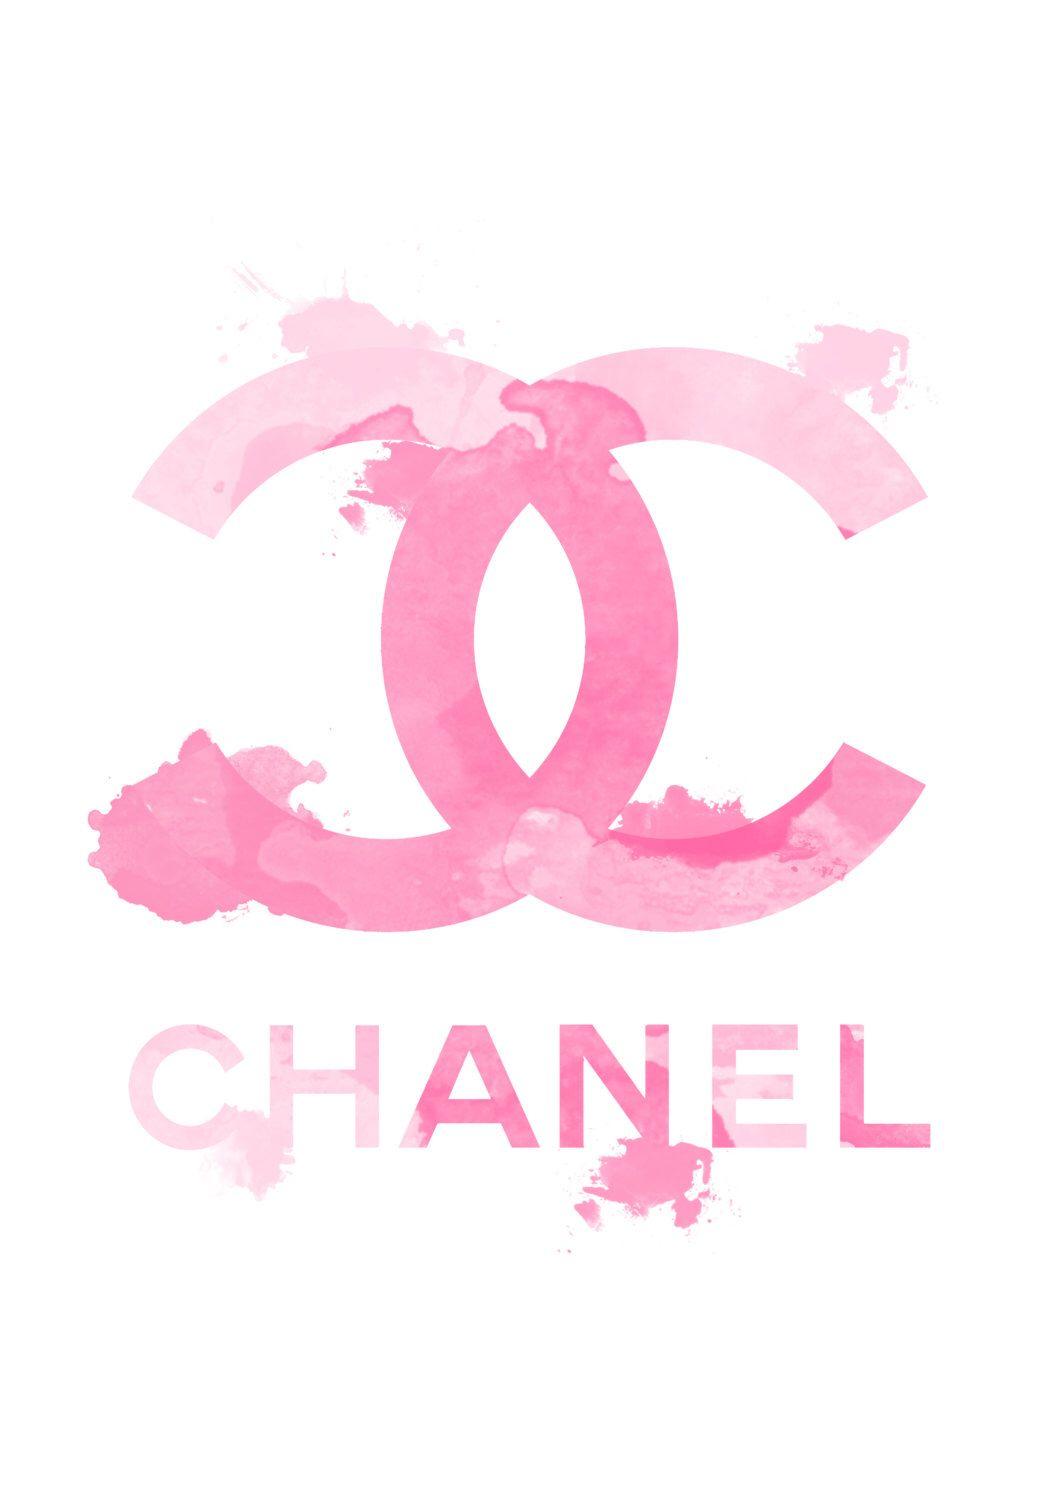 CHANEL logo Template  PosterMyWall